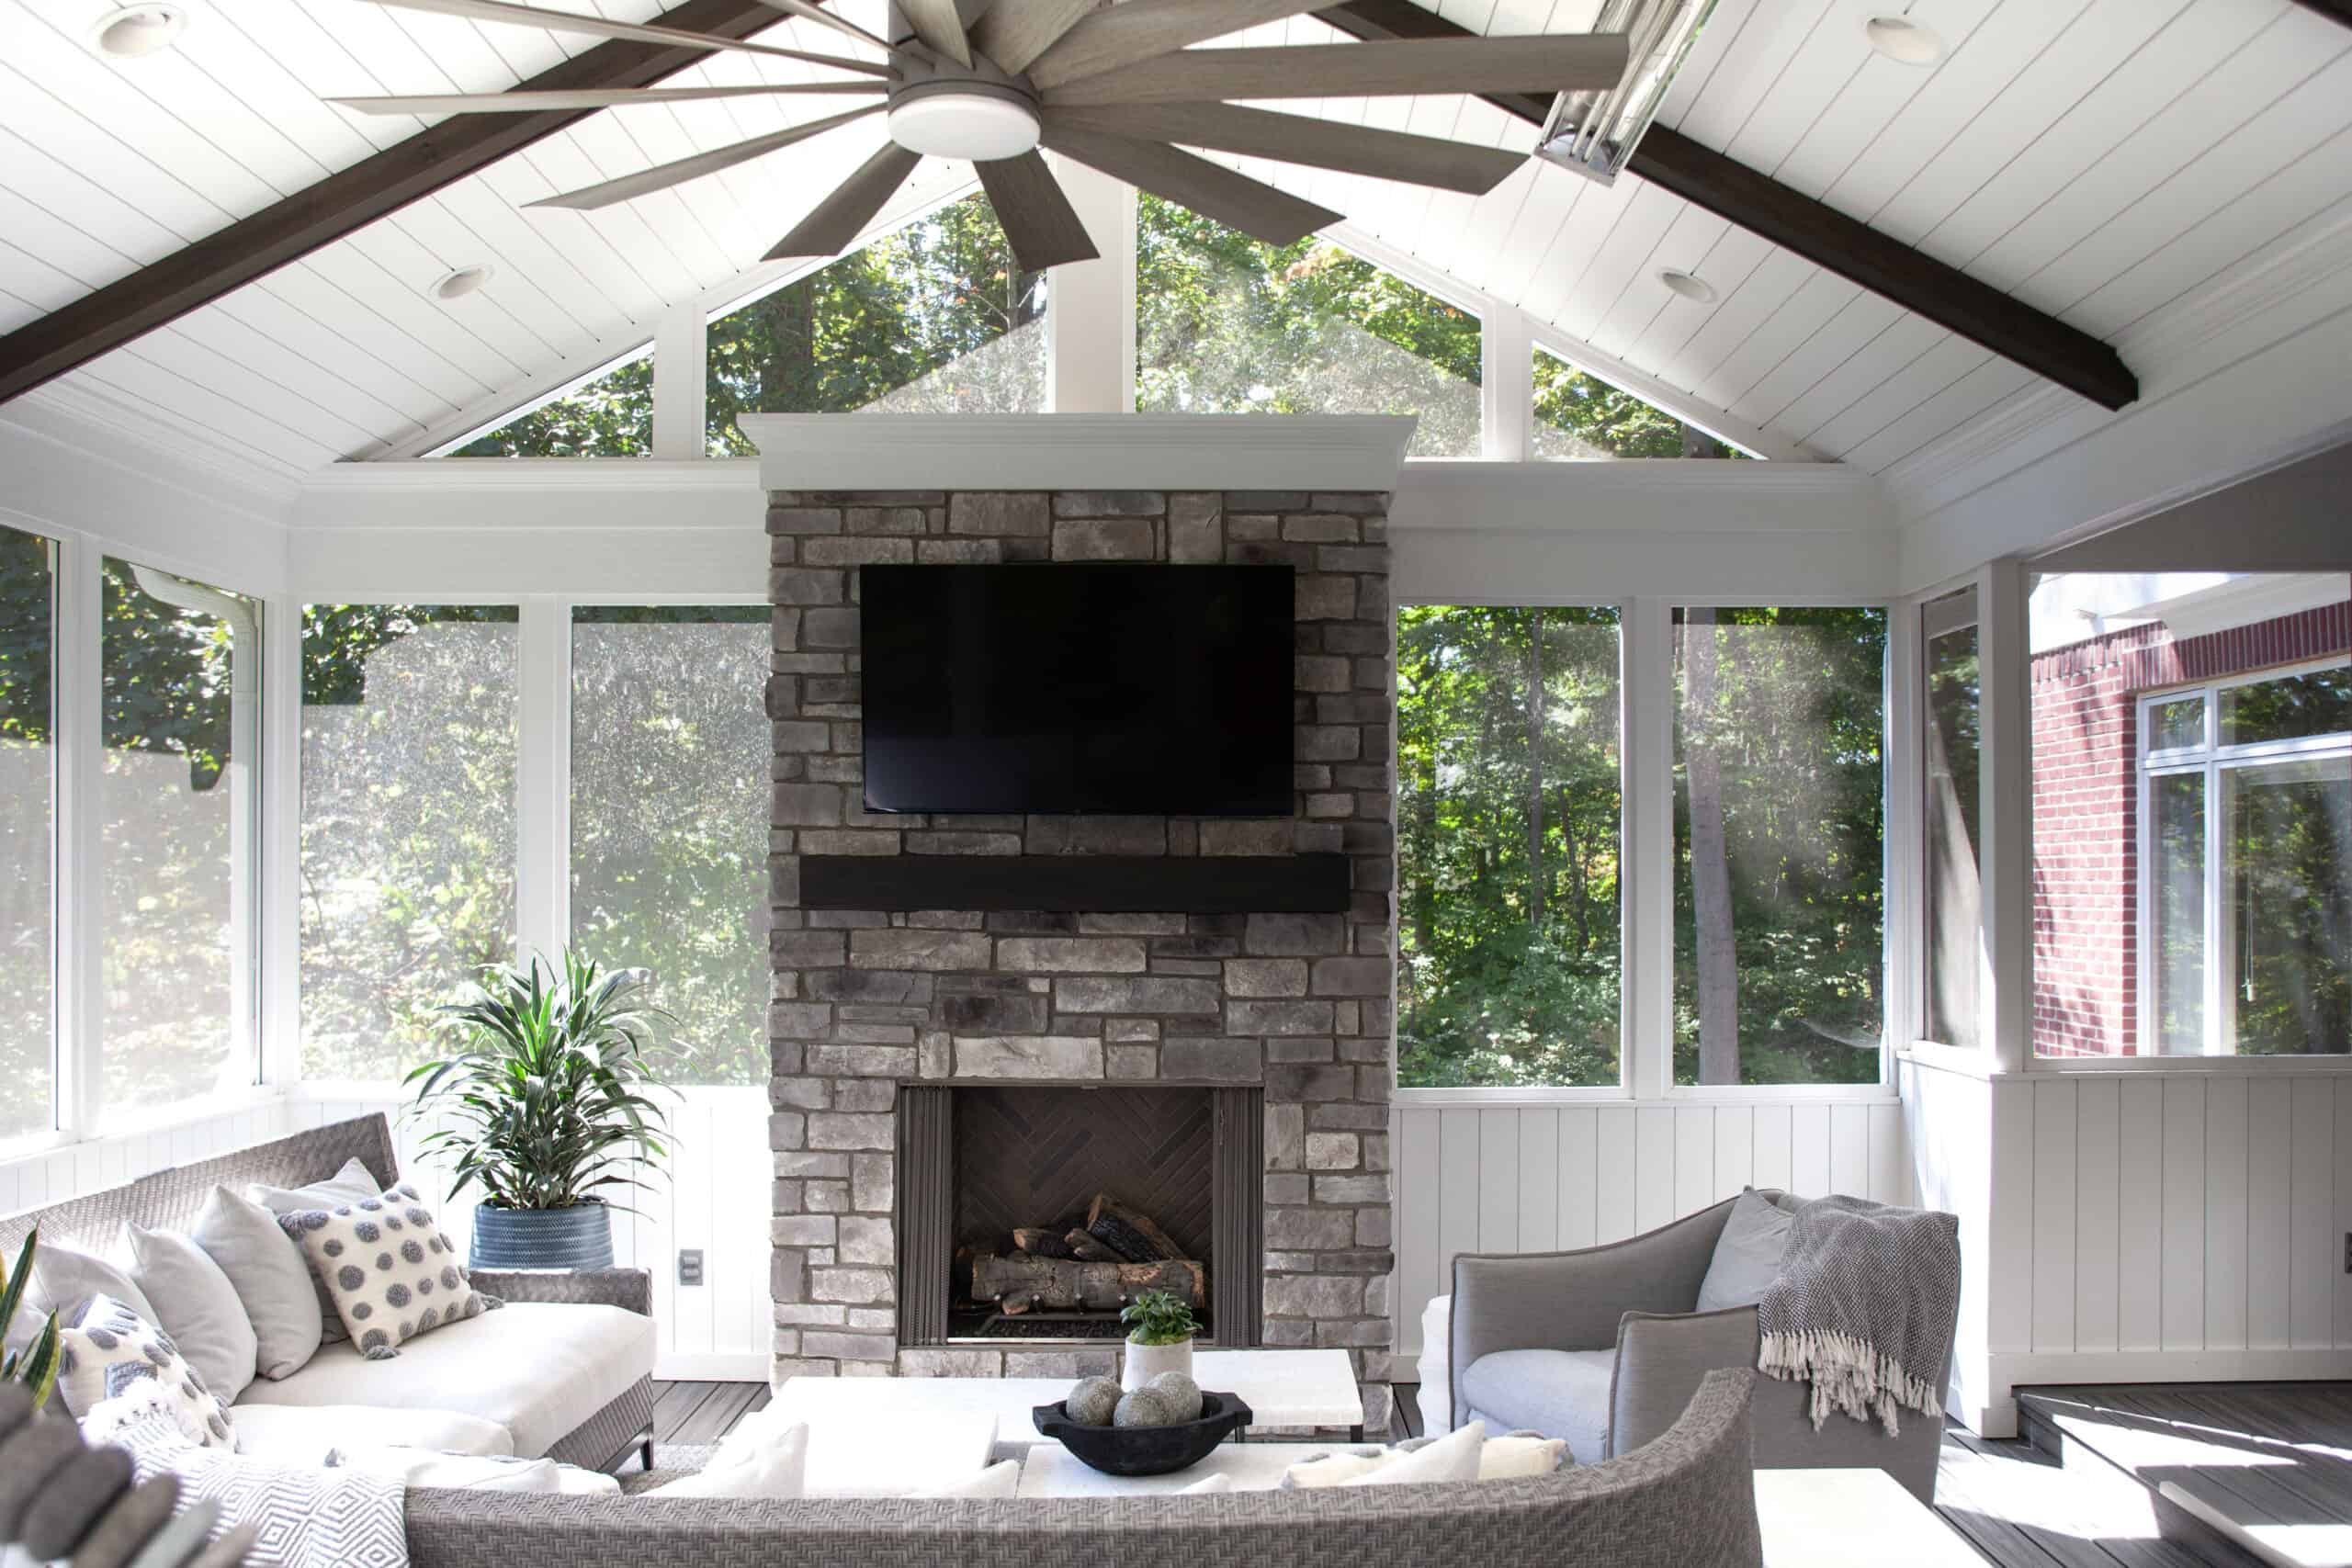 Nicholas Design Build | Remodel description: A remodeled screened-in porch featuring a cozy fireplace and a TV.